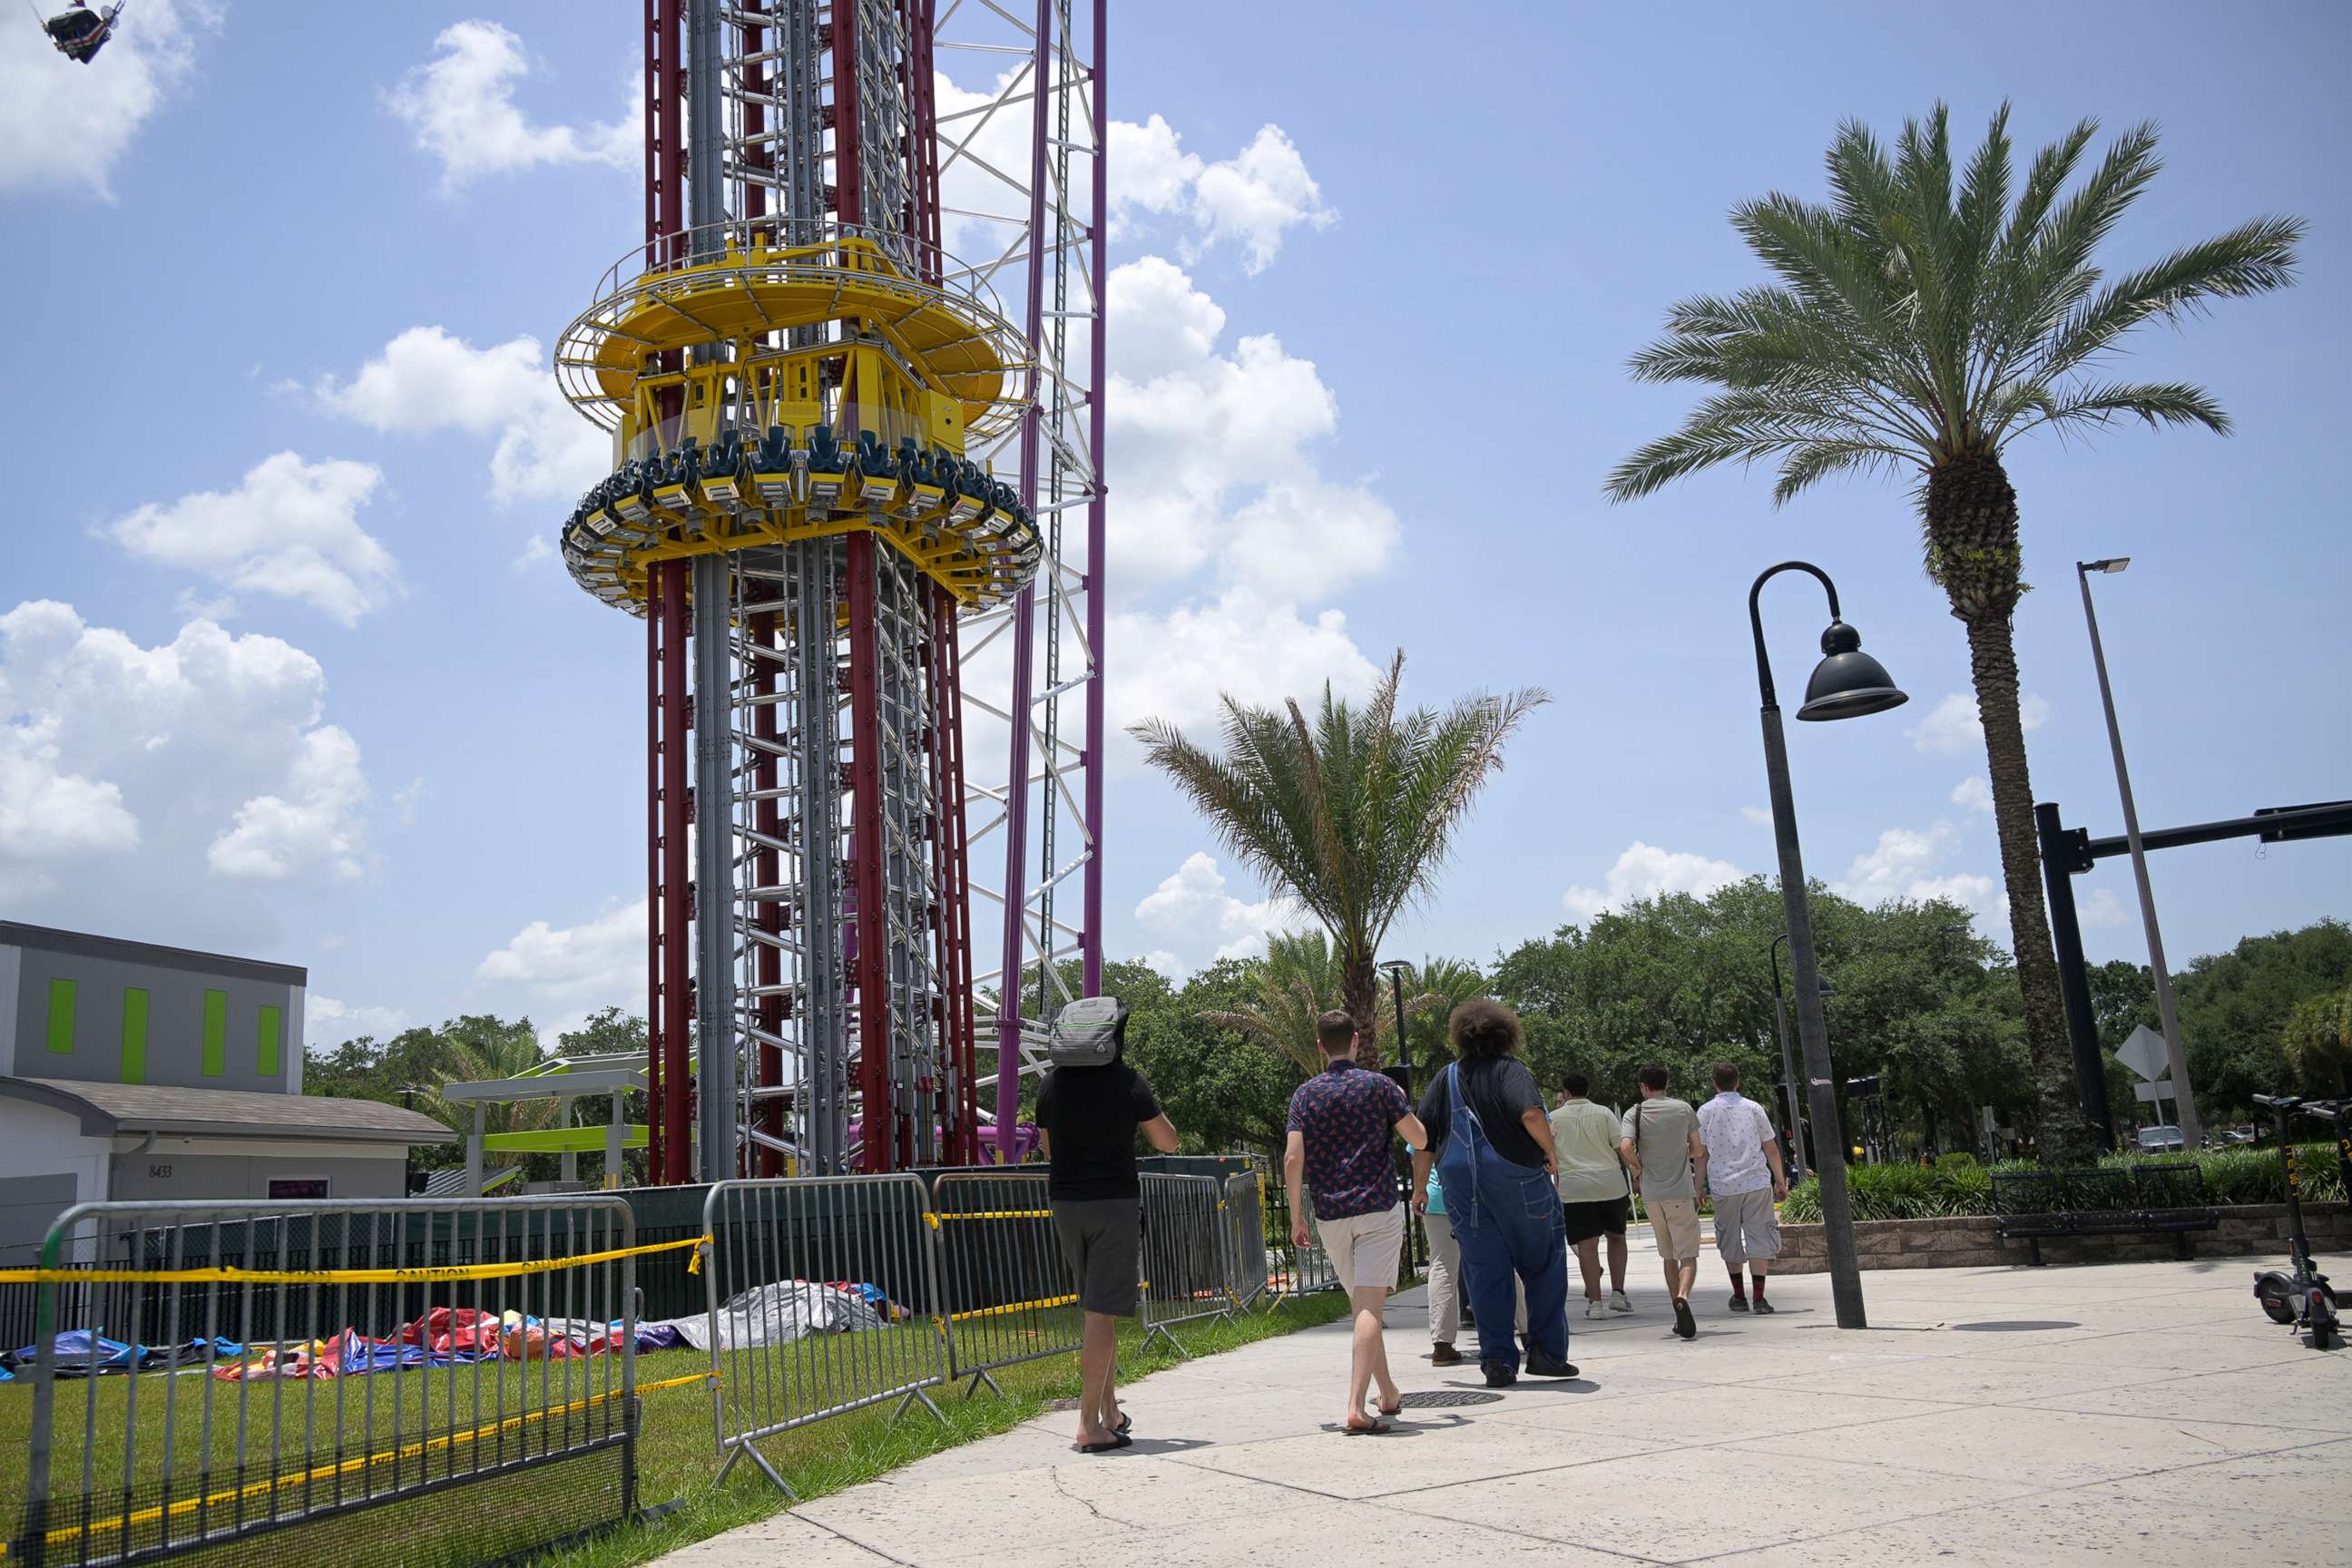 PHOTO: People walk past the Orlando Free Fall ride at the ICON Park entertainment complex, where Tyre Sampson fell to his death while on the ride in Orlando, Fla. June 15, 2022.